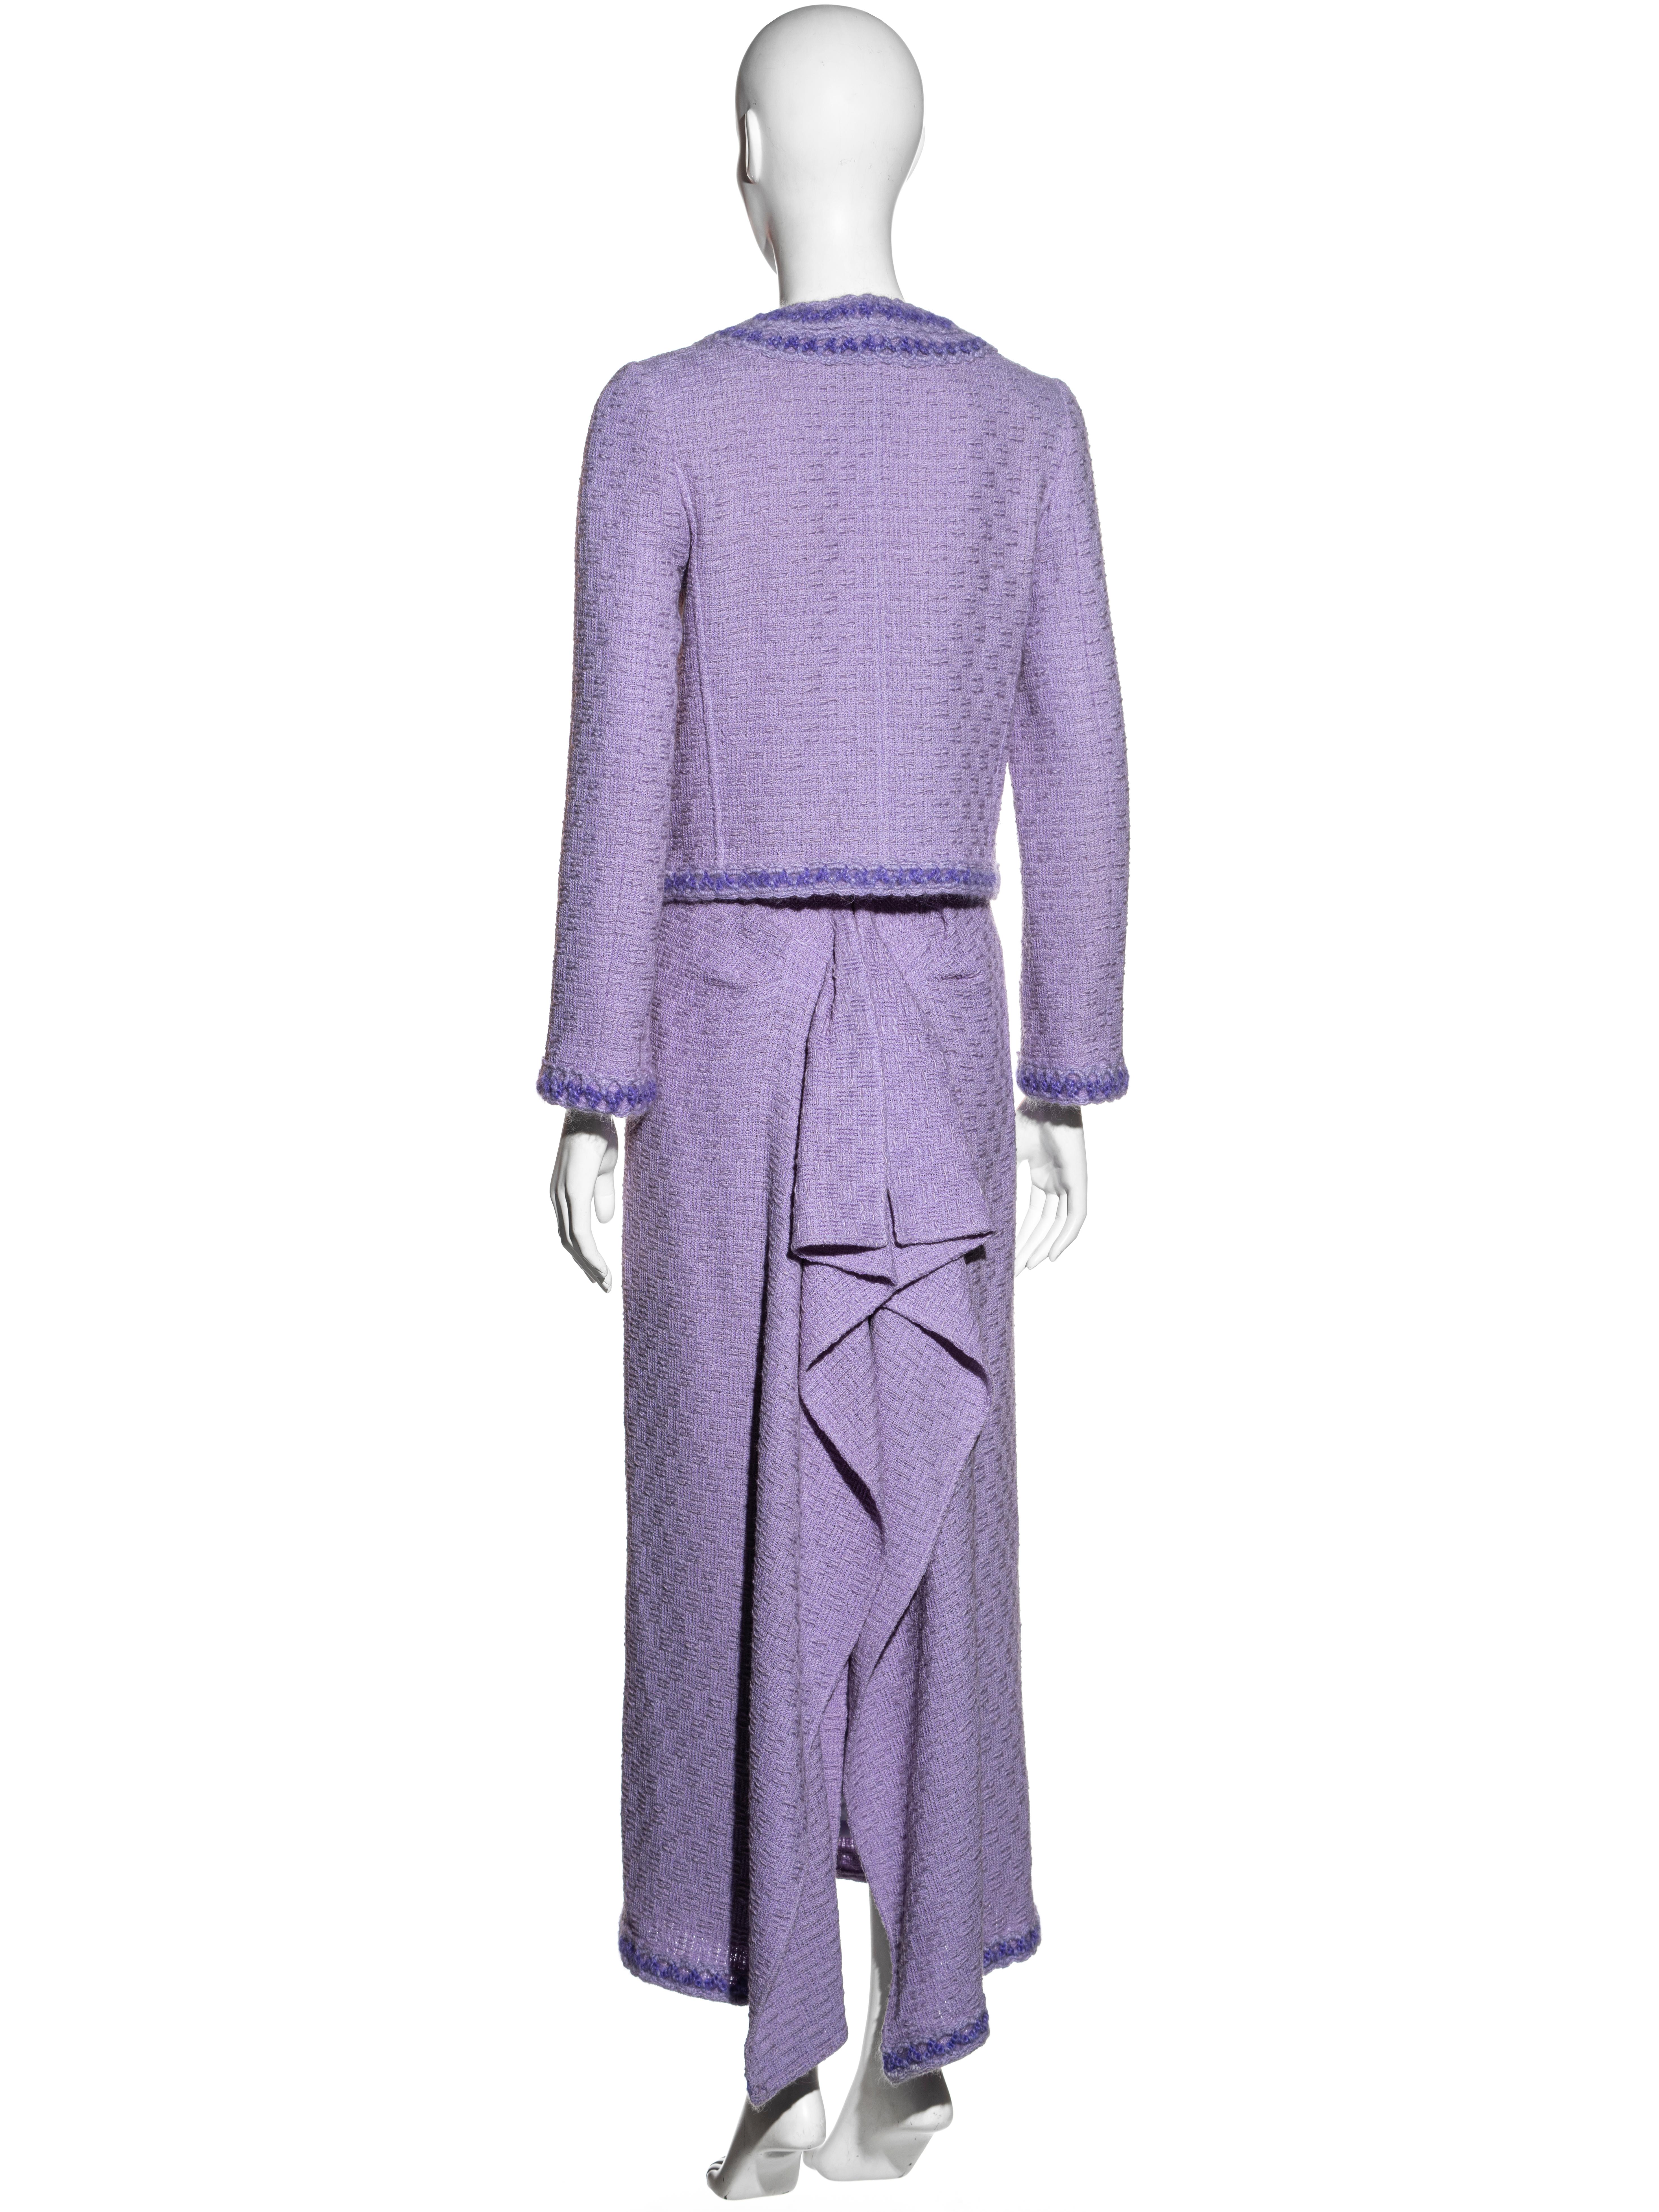 Chanel by Karl Lagerfeld lilac tweed jacket and maxi skirt suit, fw 1998 For Sale 5